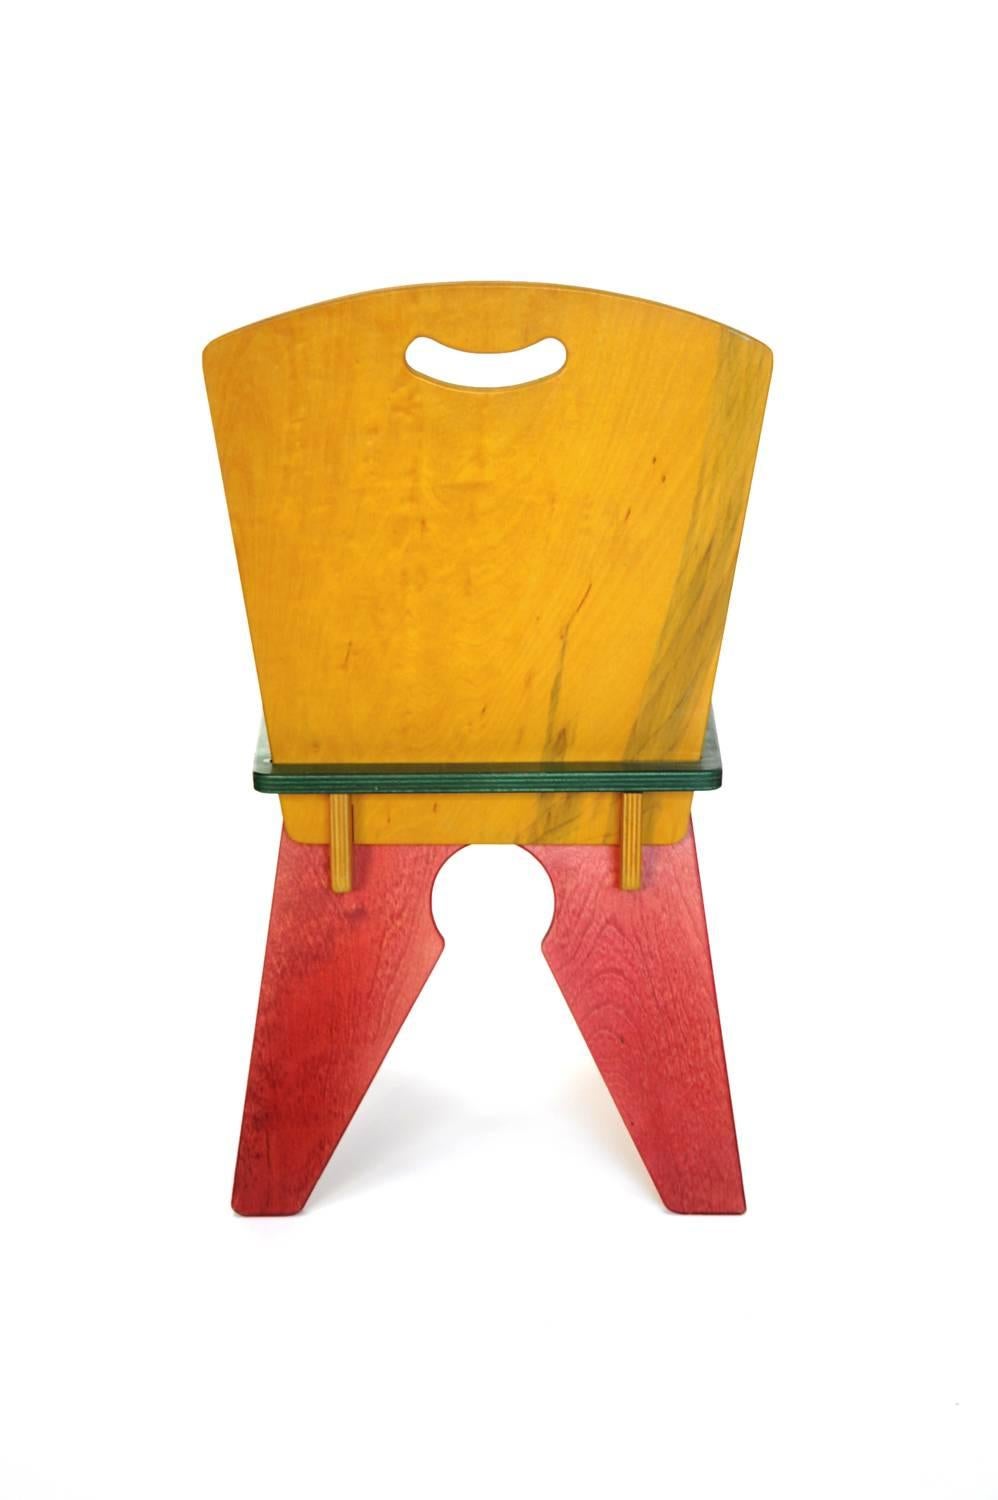 American Red Yellow Green Notch Chair, USA, 1980s For Sale